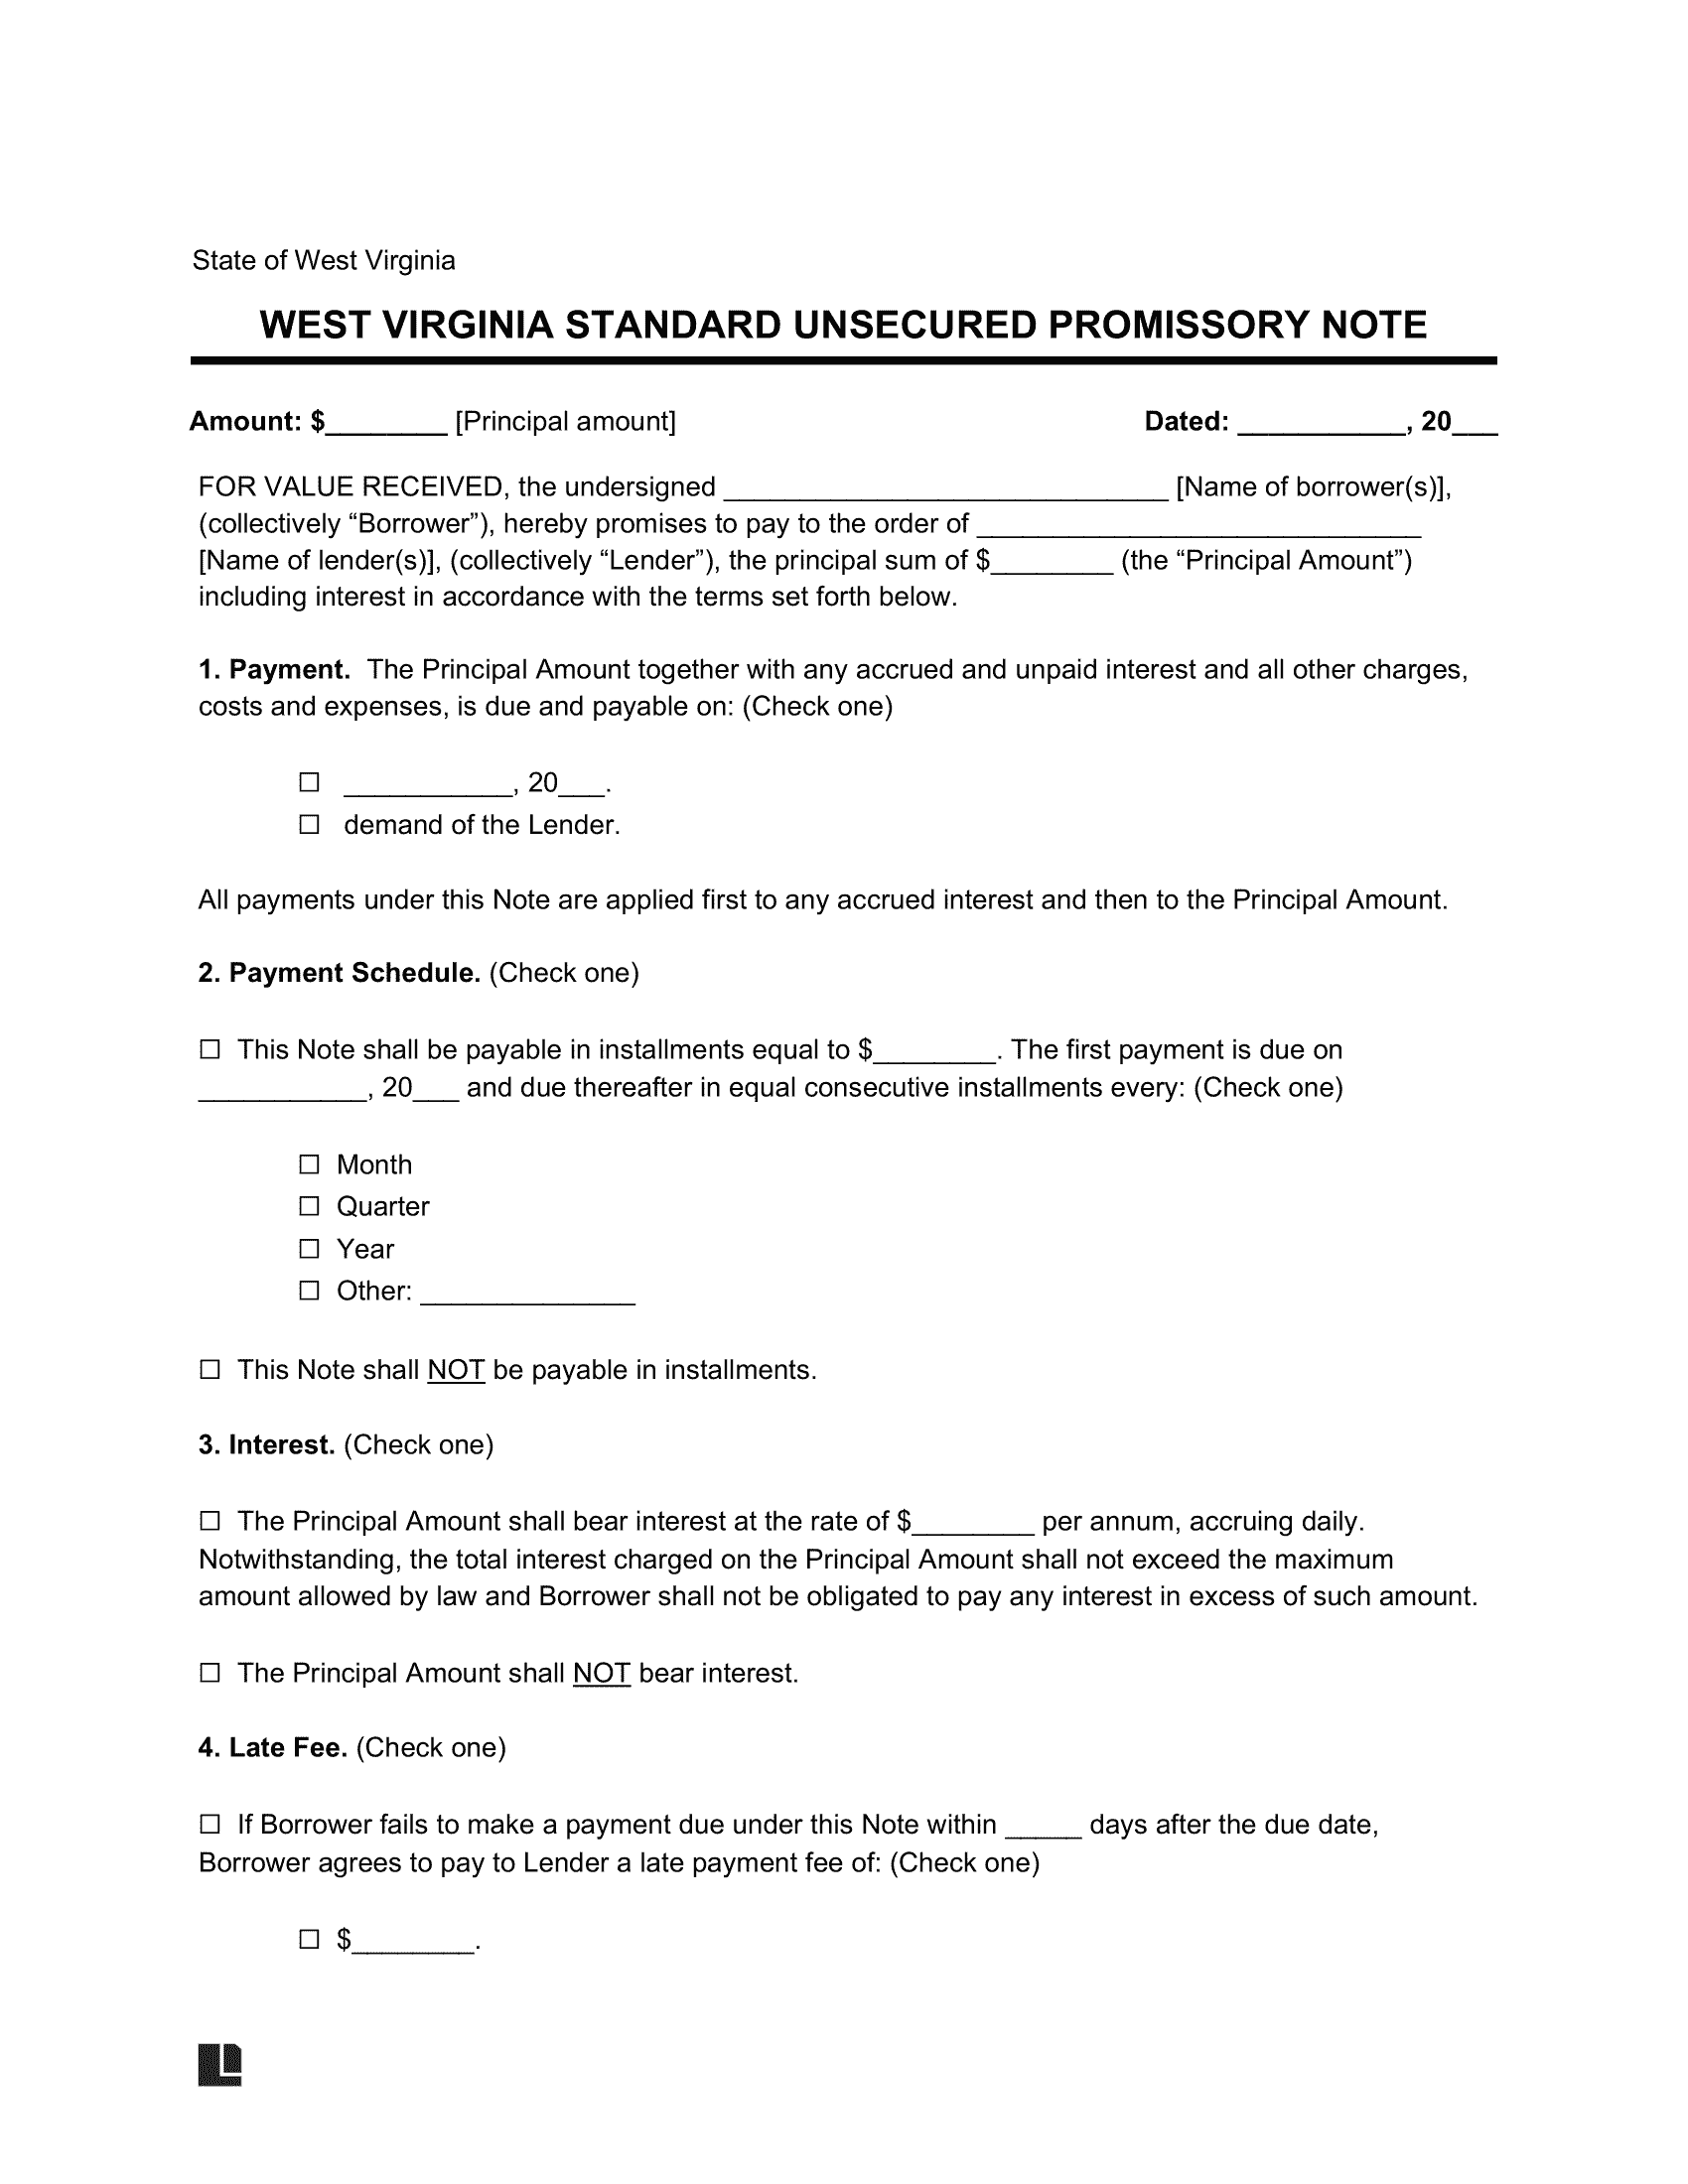 West Virginia Standard Unsecured Promissory Note Template